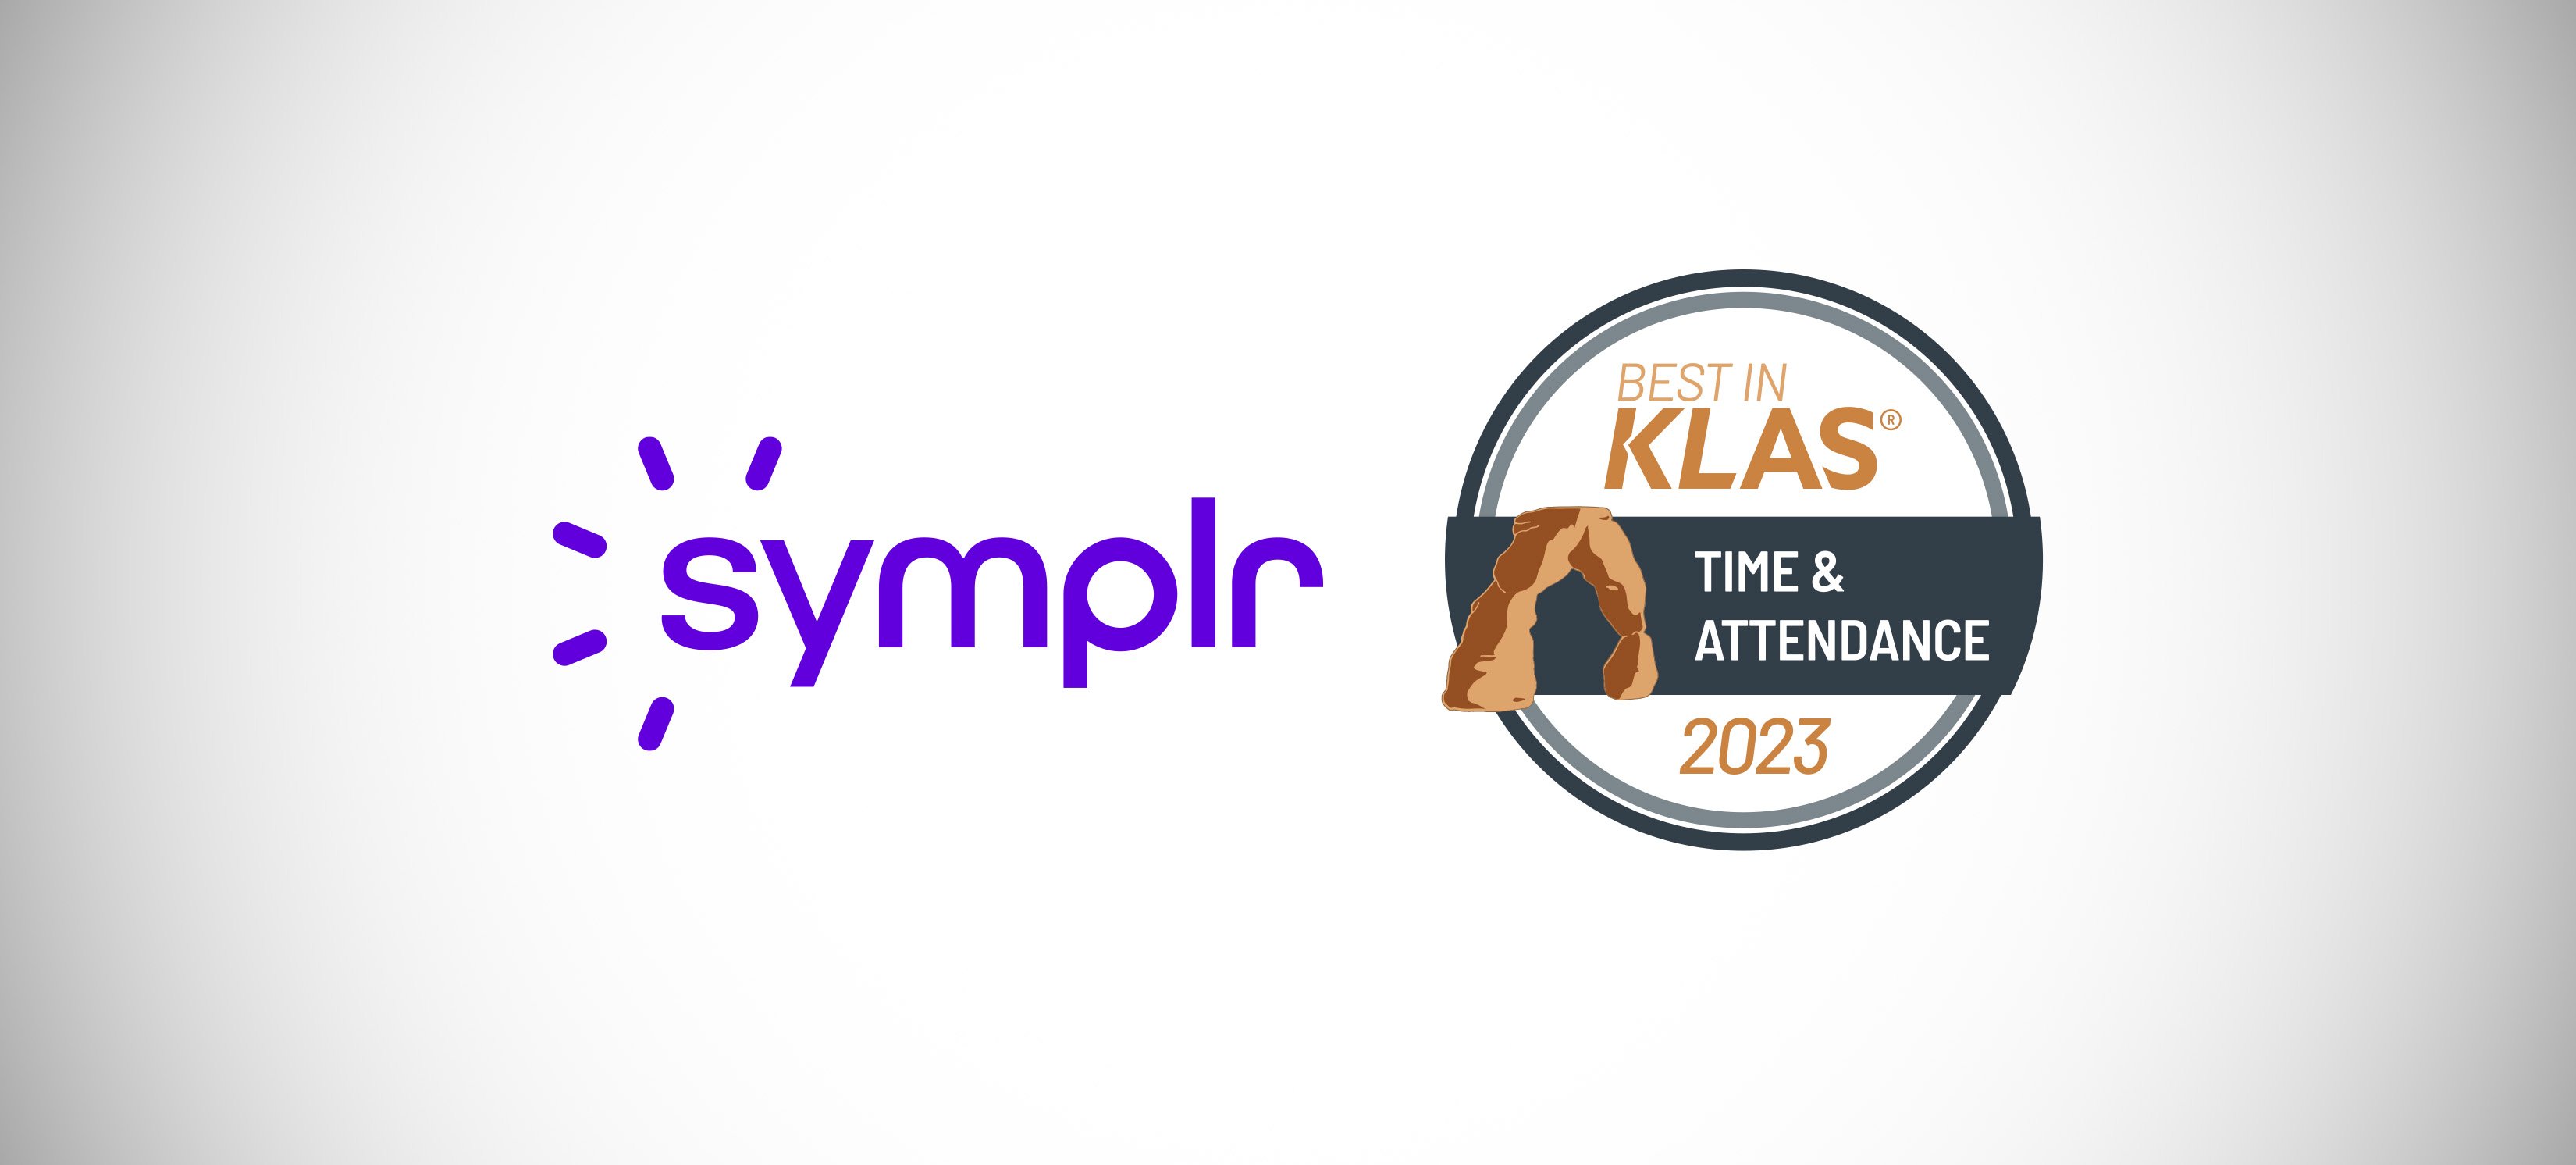 symplr’s Time and Attendance Solution Wins Best in KLAS Award  